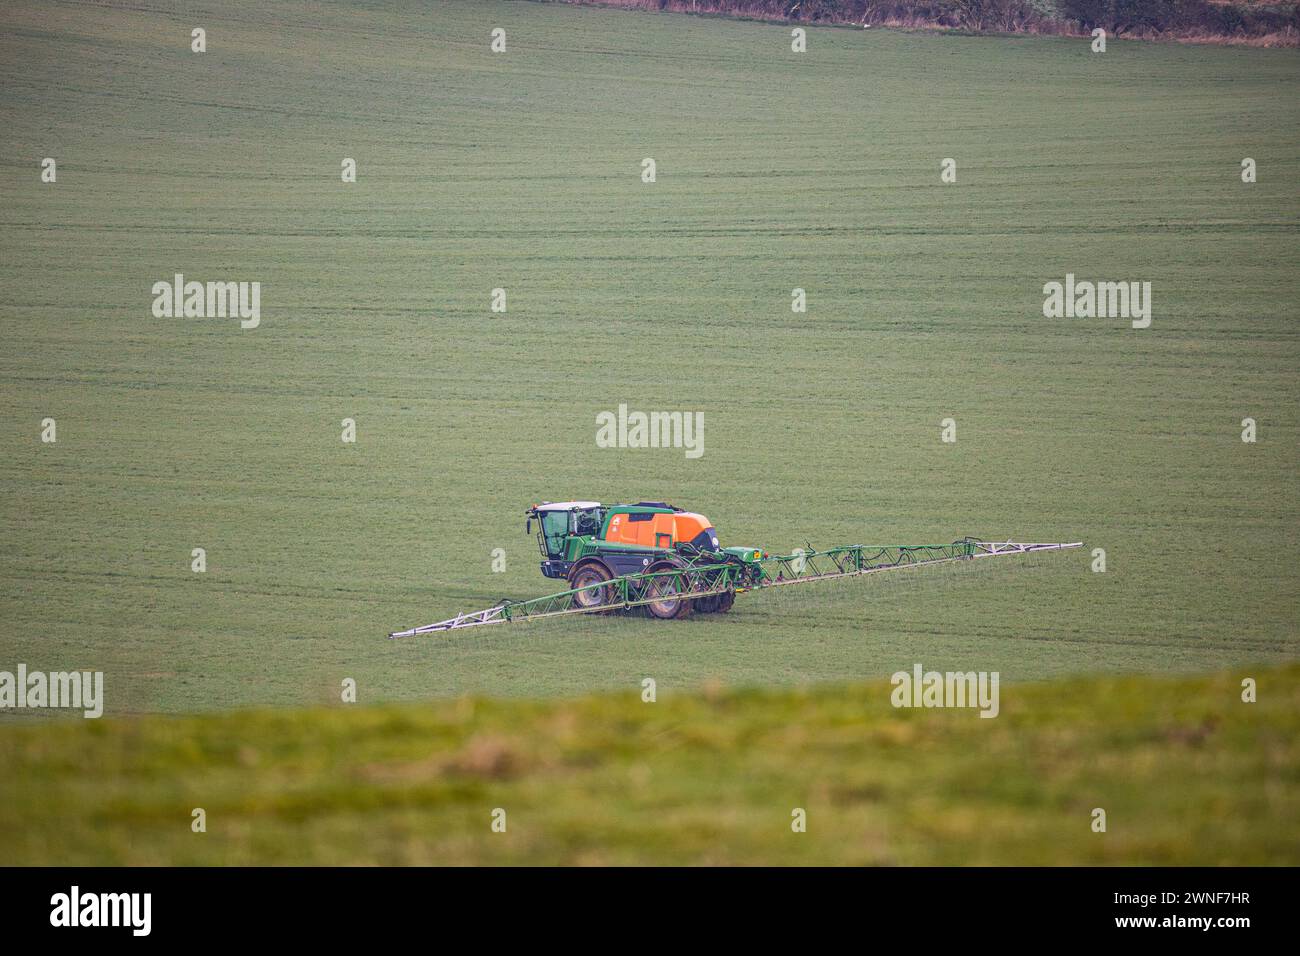 Tractor crop spraying in a wiltshire field landscape, uk farming Stock Photo